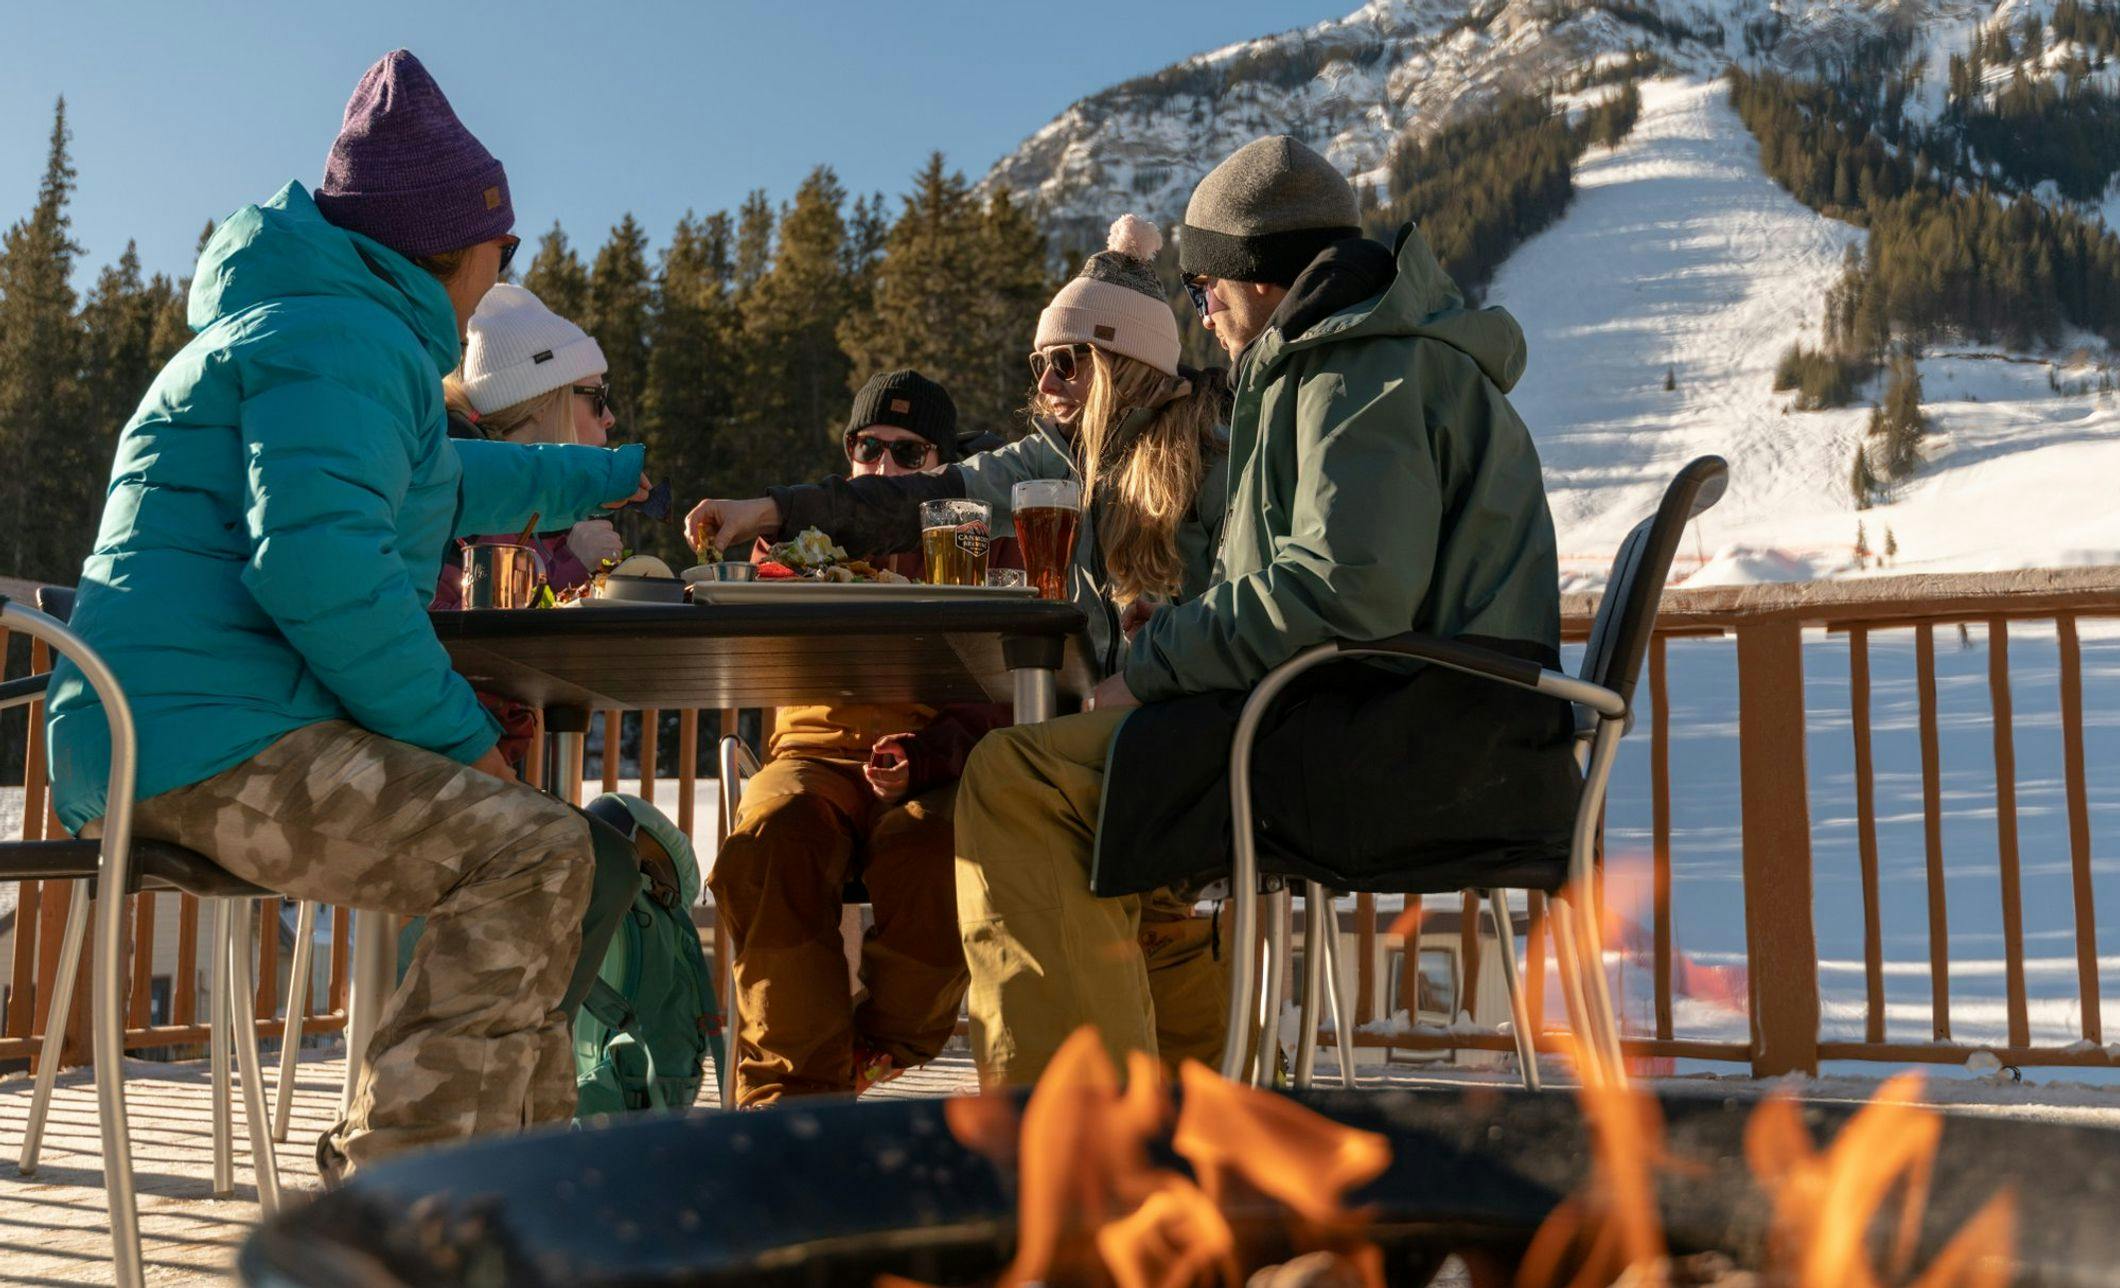 Friends sit around an outdoor table and a nearby outdoor fire pit with ski runs and snow in the background on a sunny day